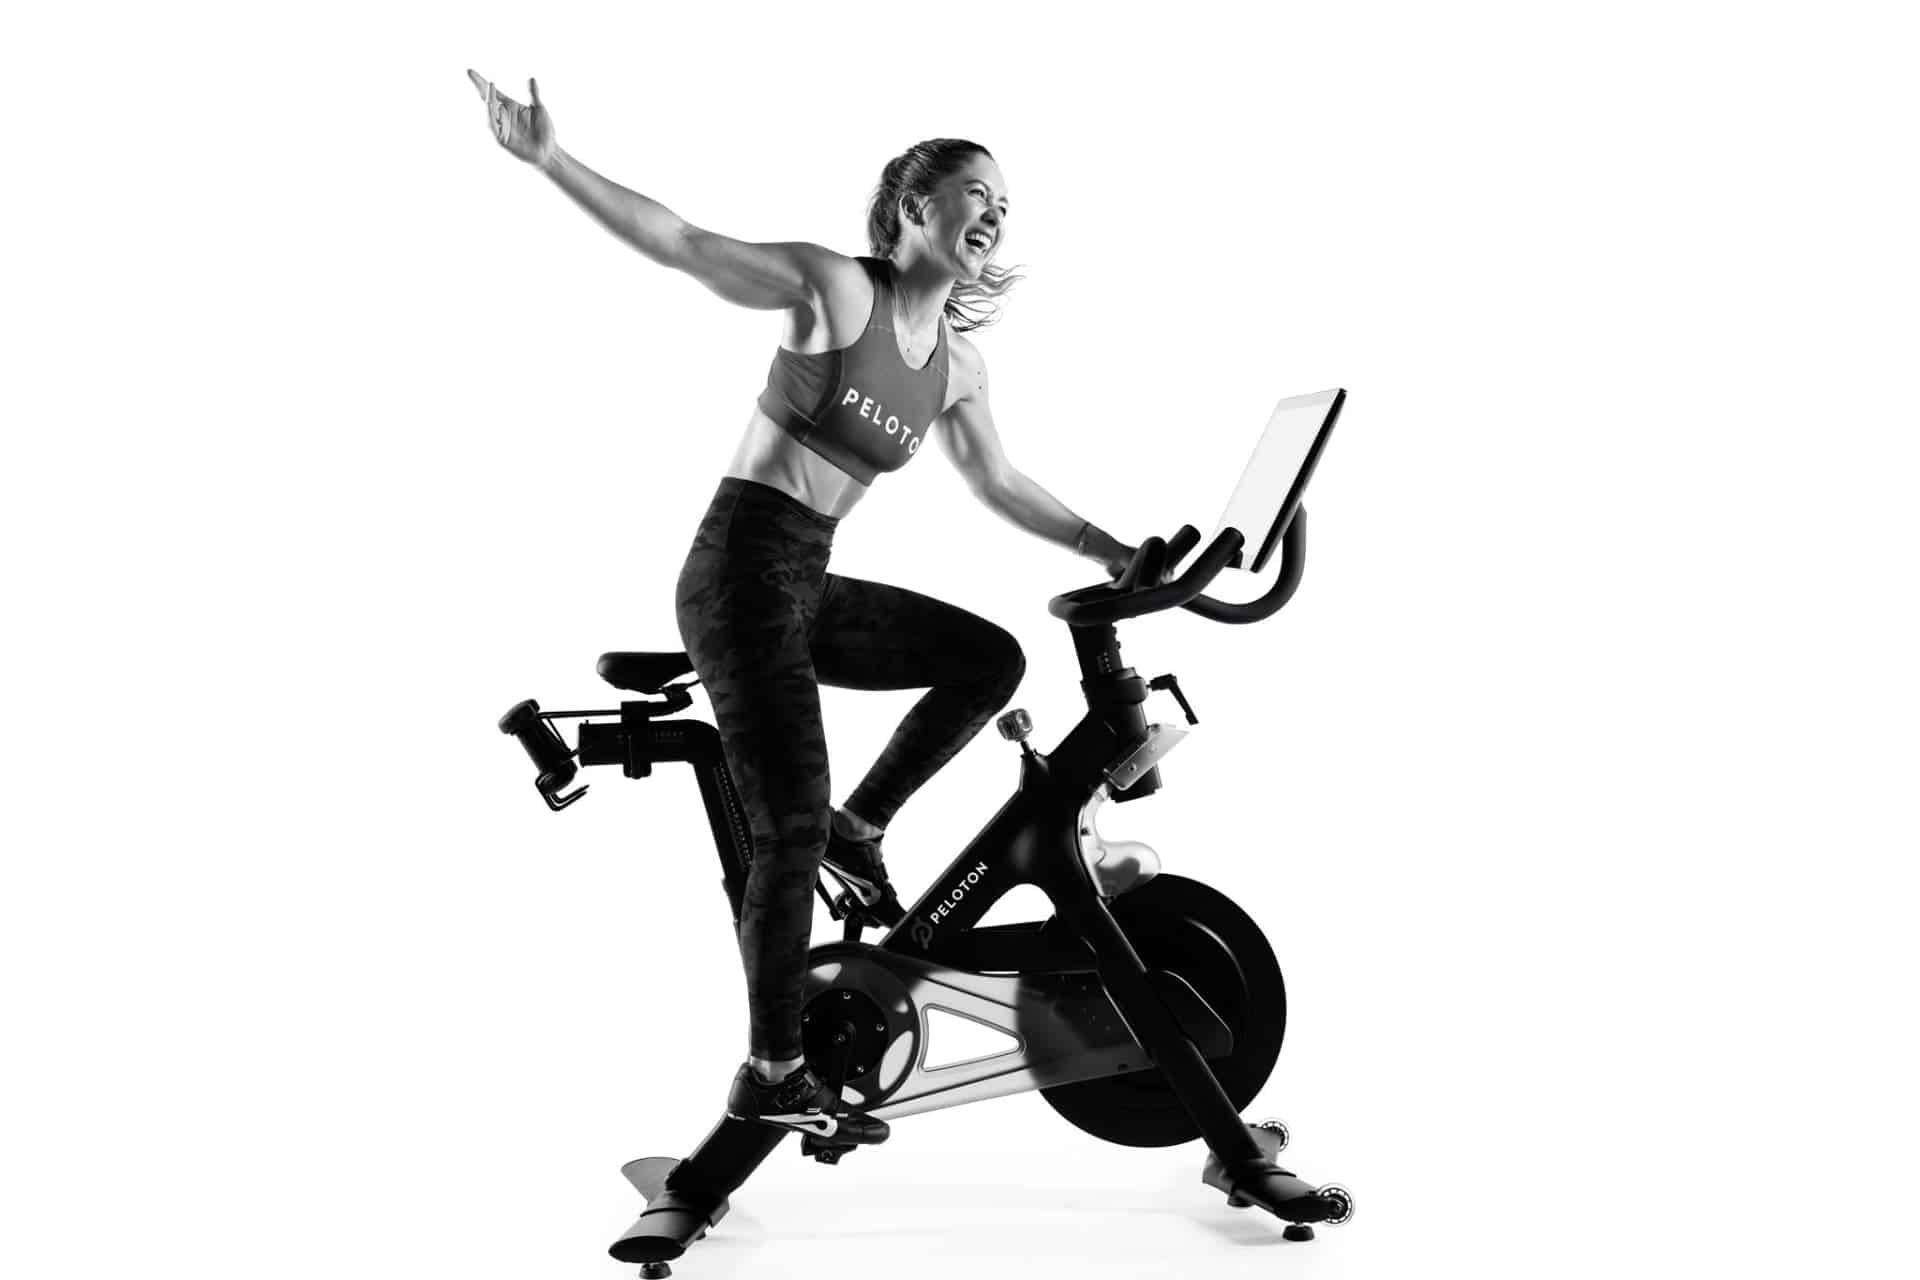 Emma Lovewell, Peloton instructor posing and laughing on a Peloton Bike